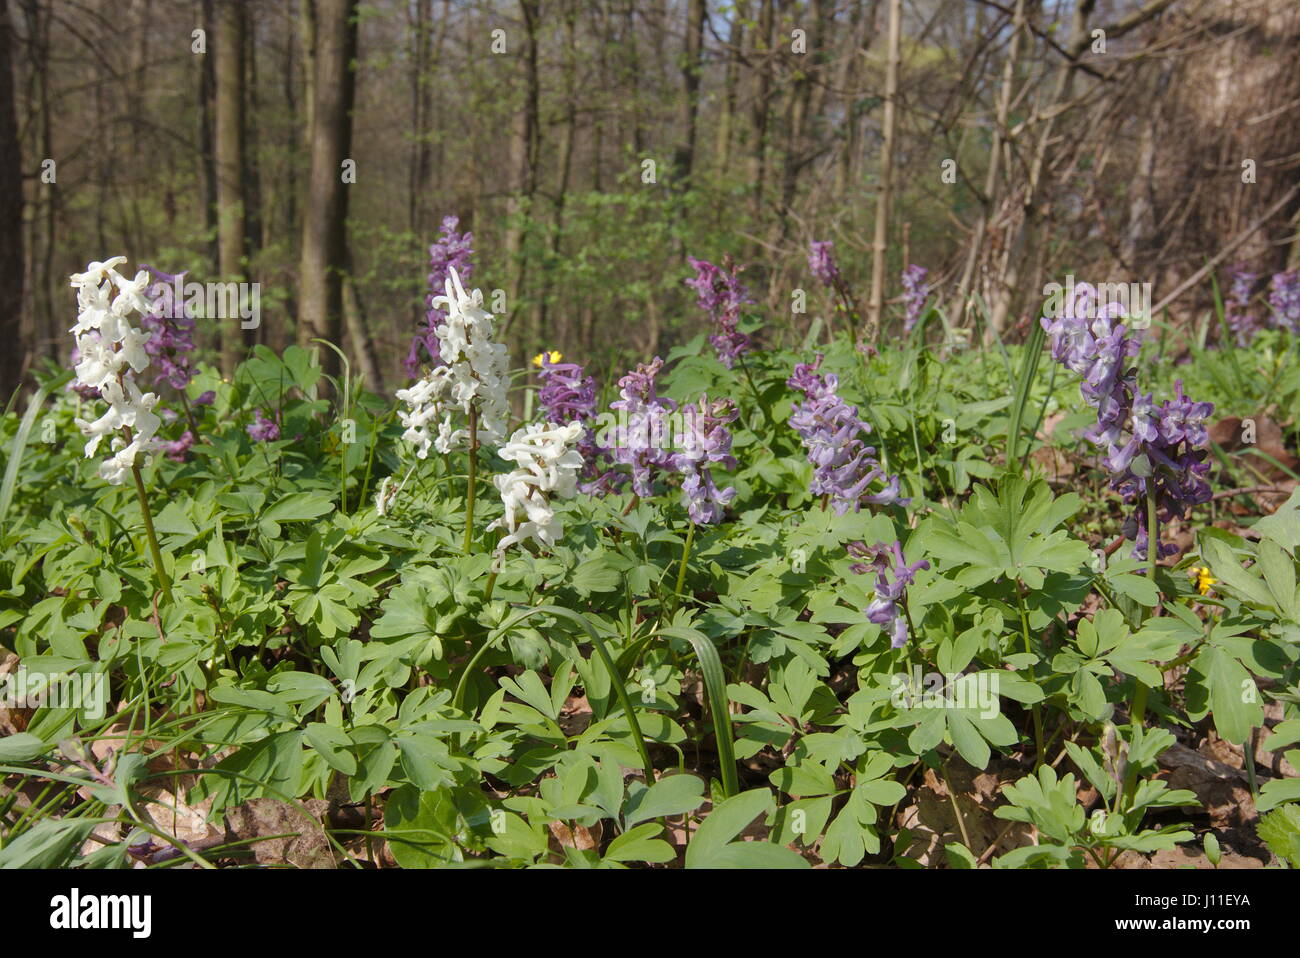 Corydalis kava, one of the early spring flowers in Polish woods Stock Photo